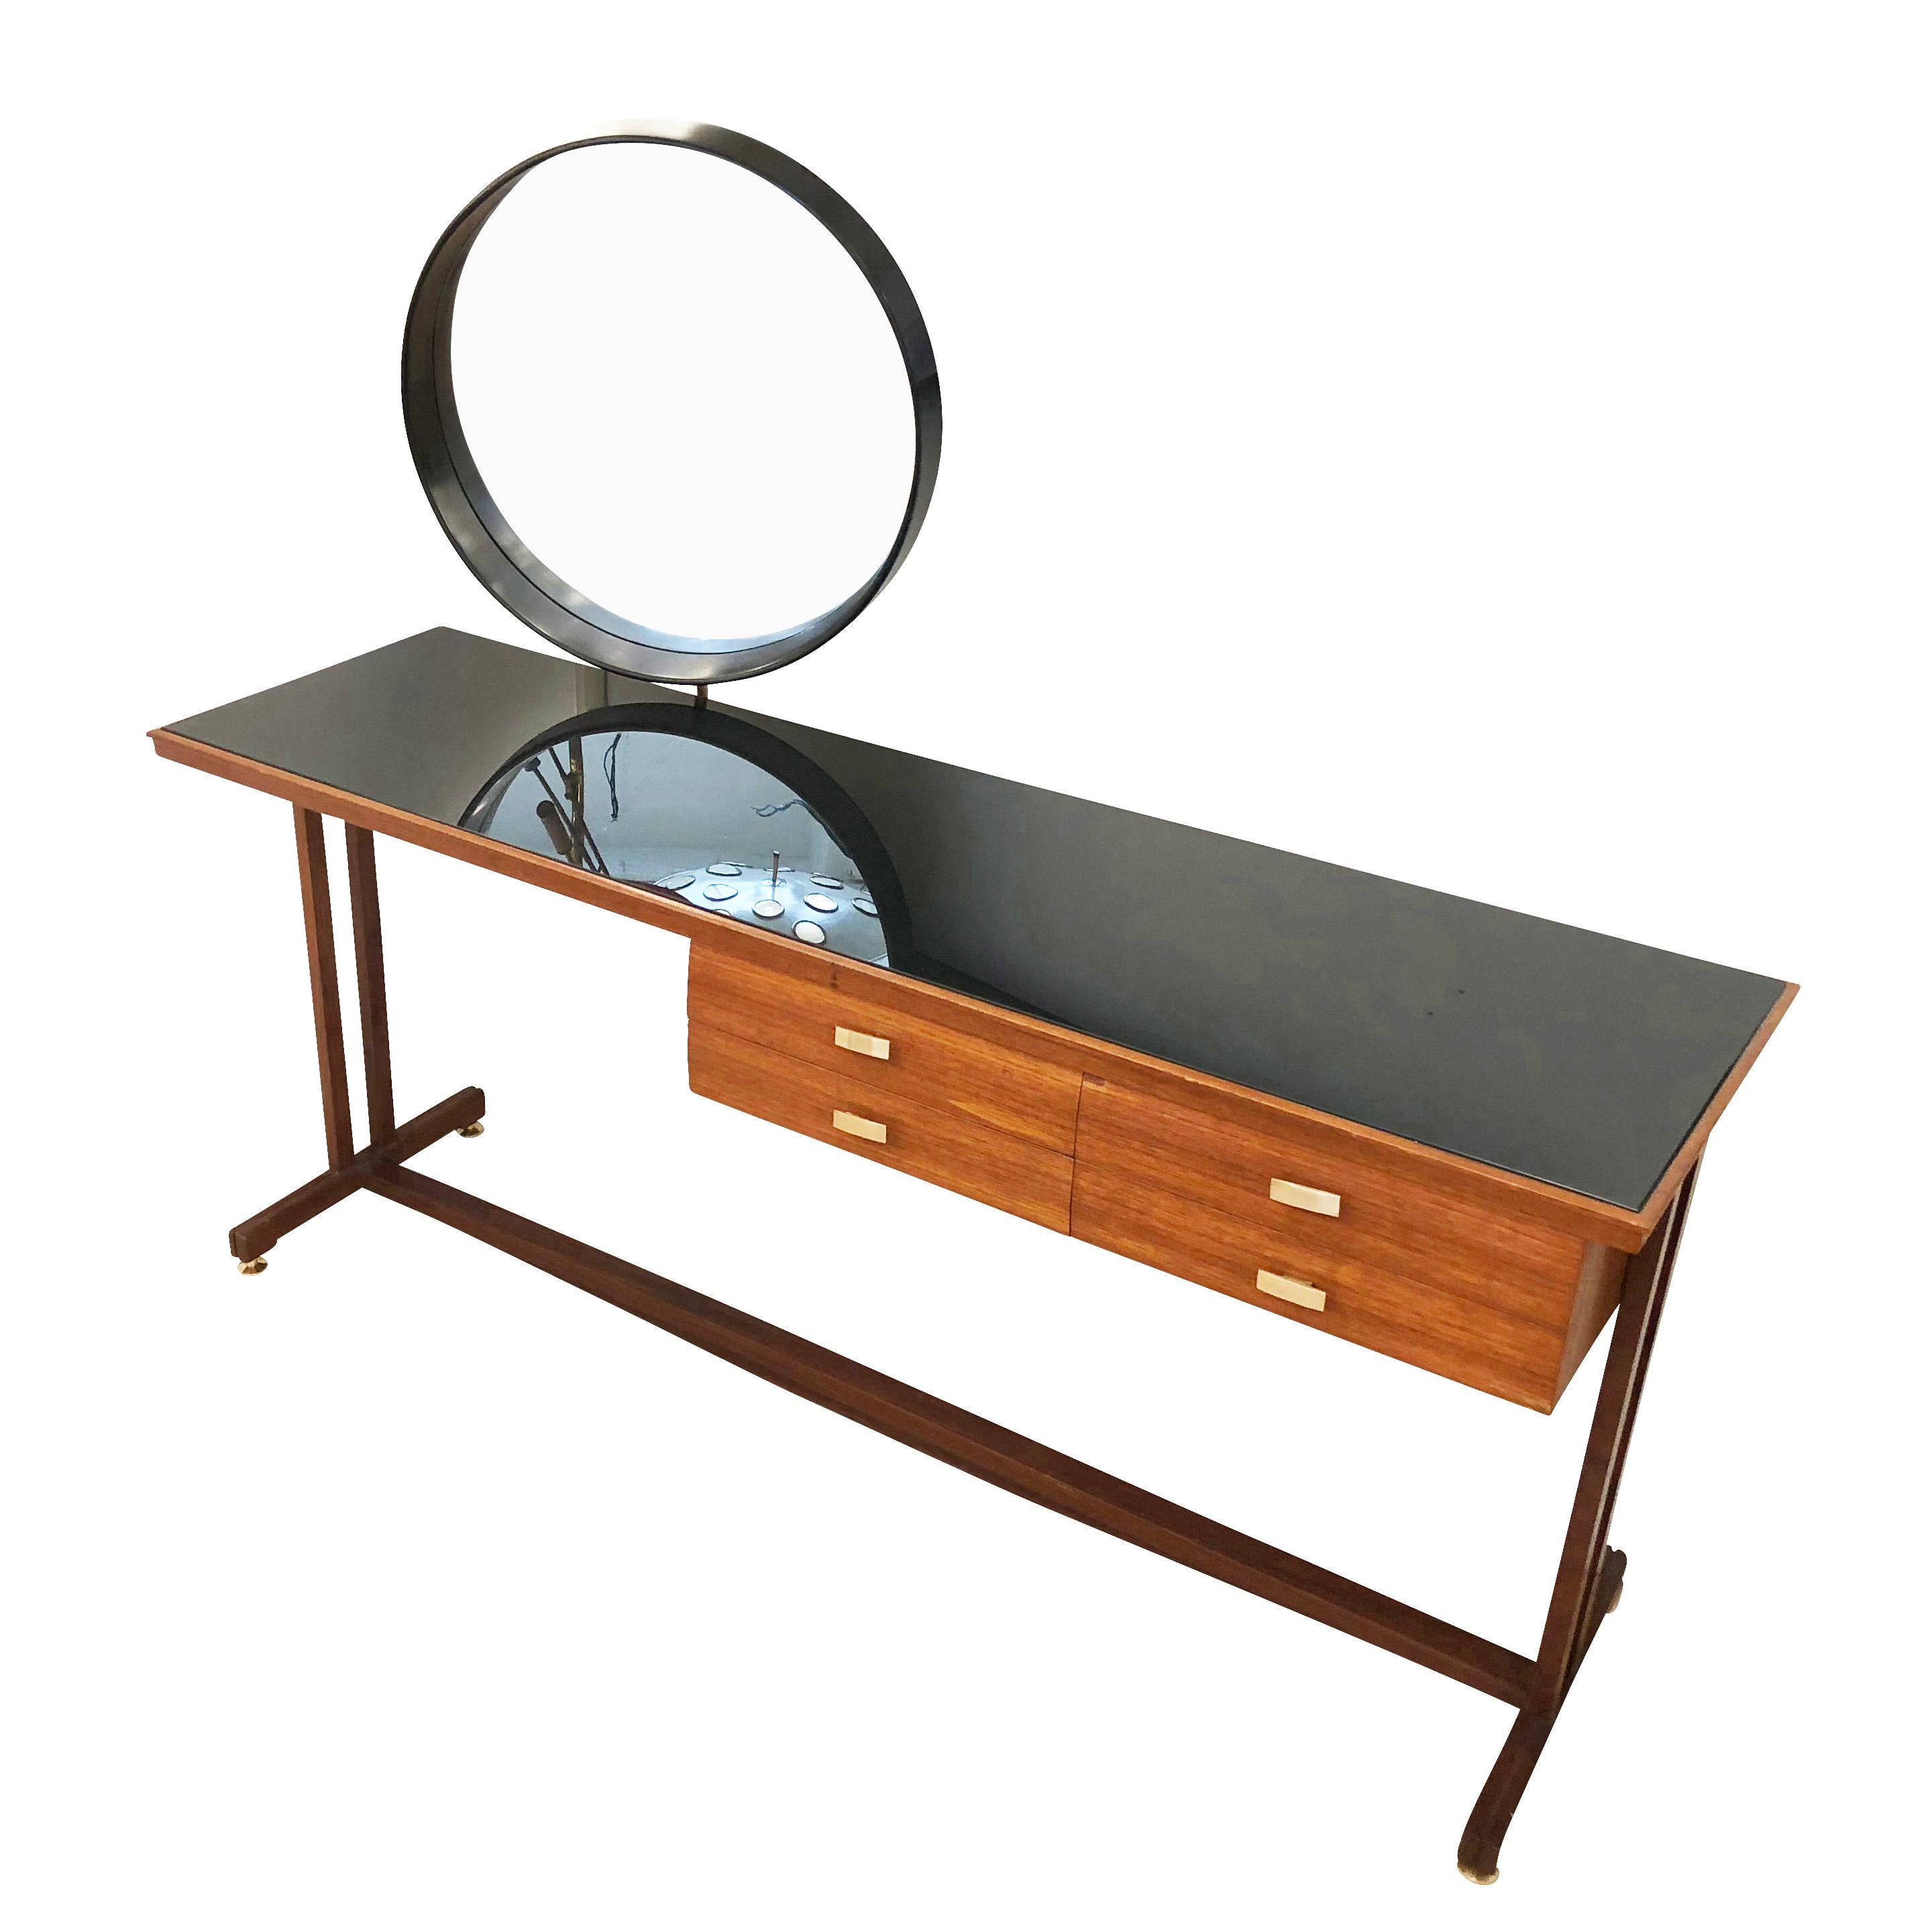 Beautiful midcentury wood vanity with a black glass top, round mirror and brass details. The mirror can be removed so that it can be used as a narrow desk. 

Condition: Excellent vintage condition, minor wear consistent with age and use. A couple